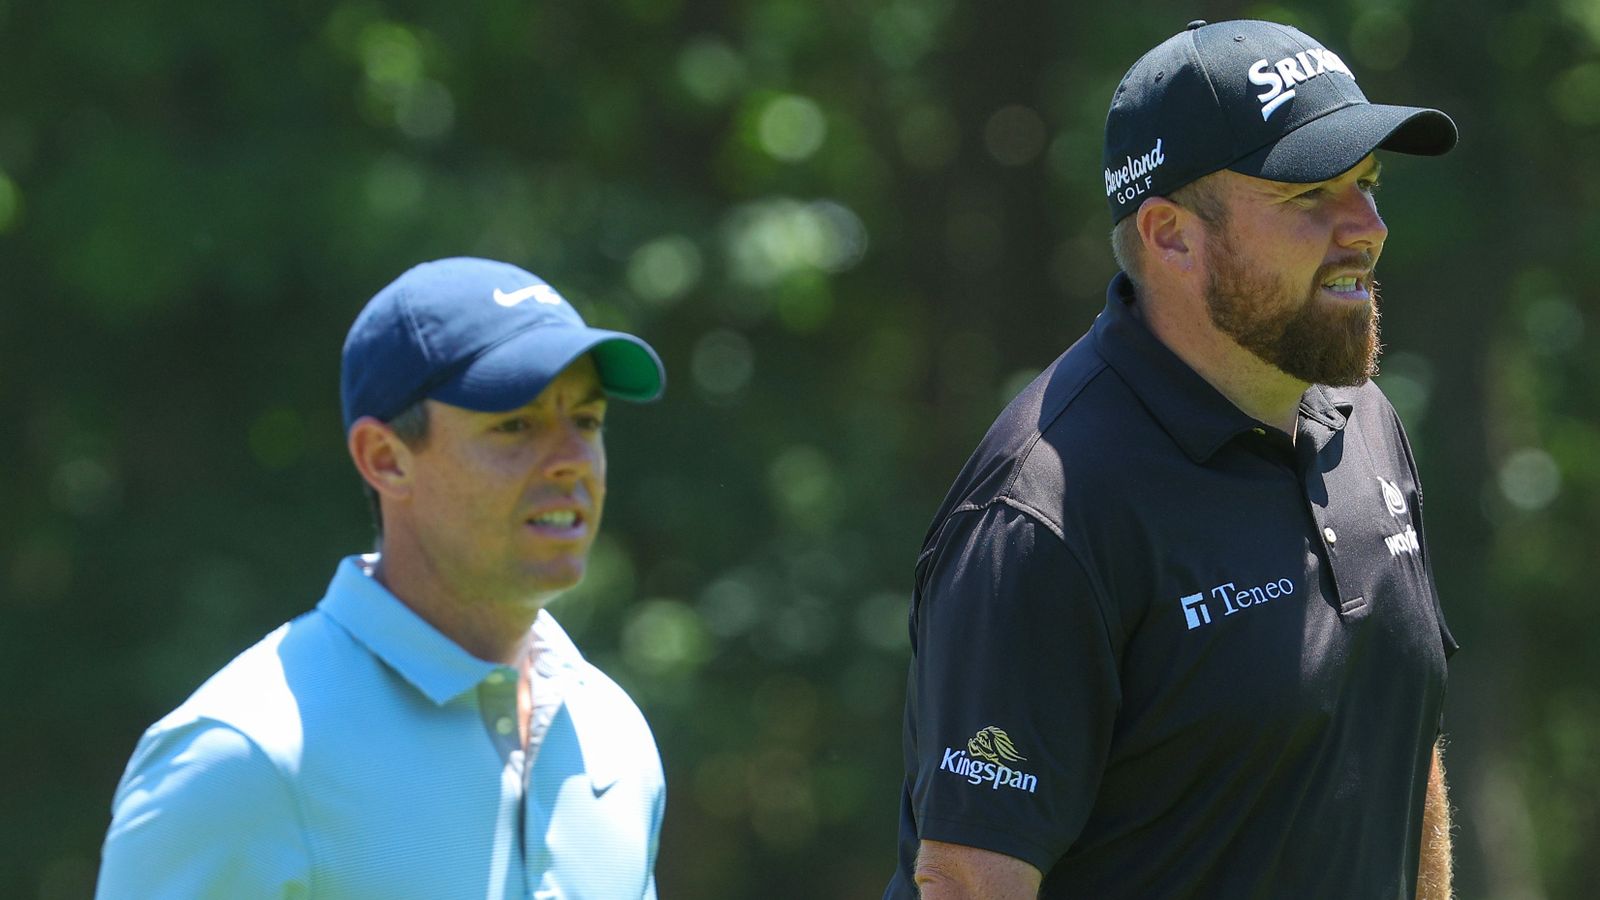 US Open: Shane Lowry relishing pairing with Phil Mickelson for first two rounds at The Country Club